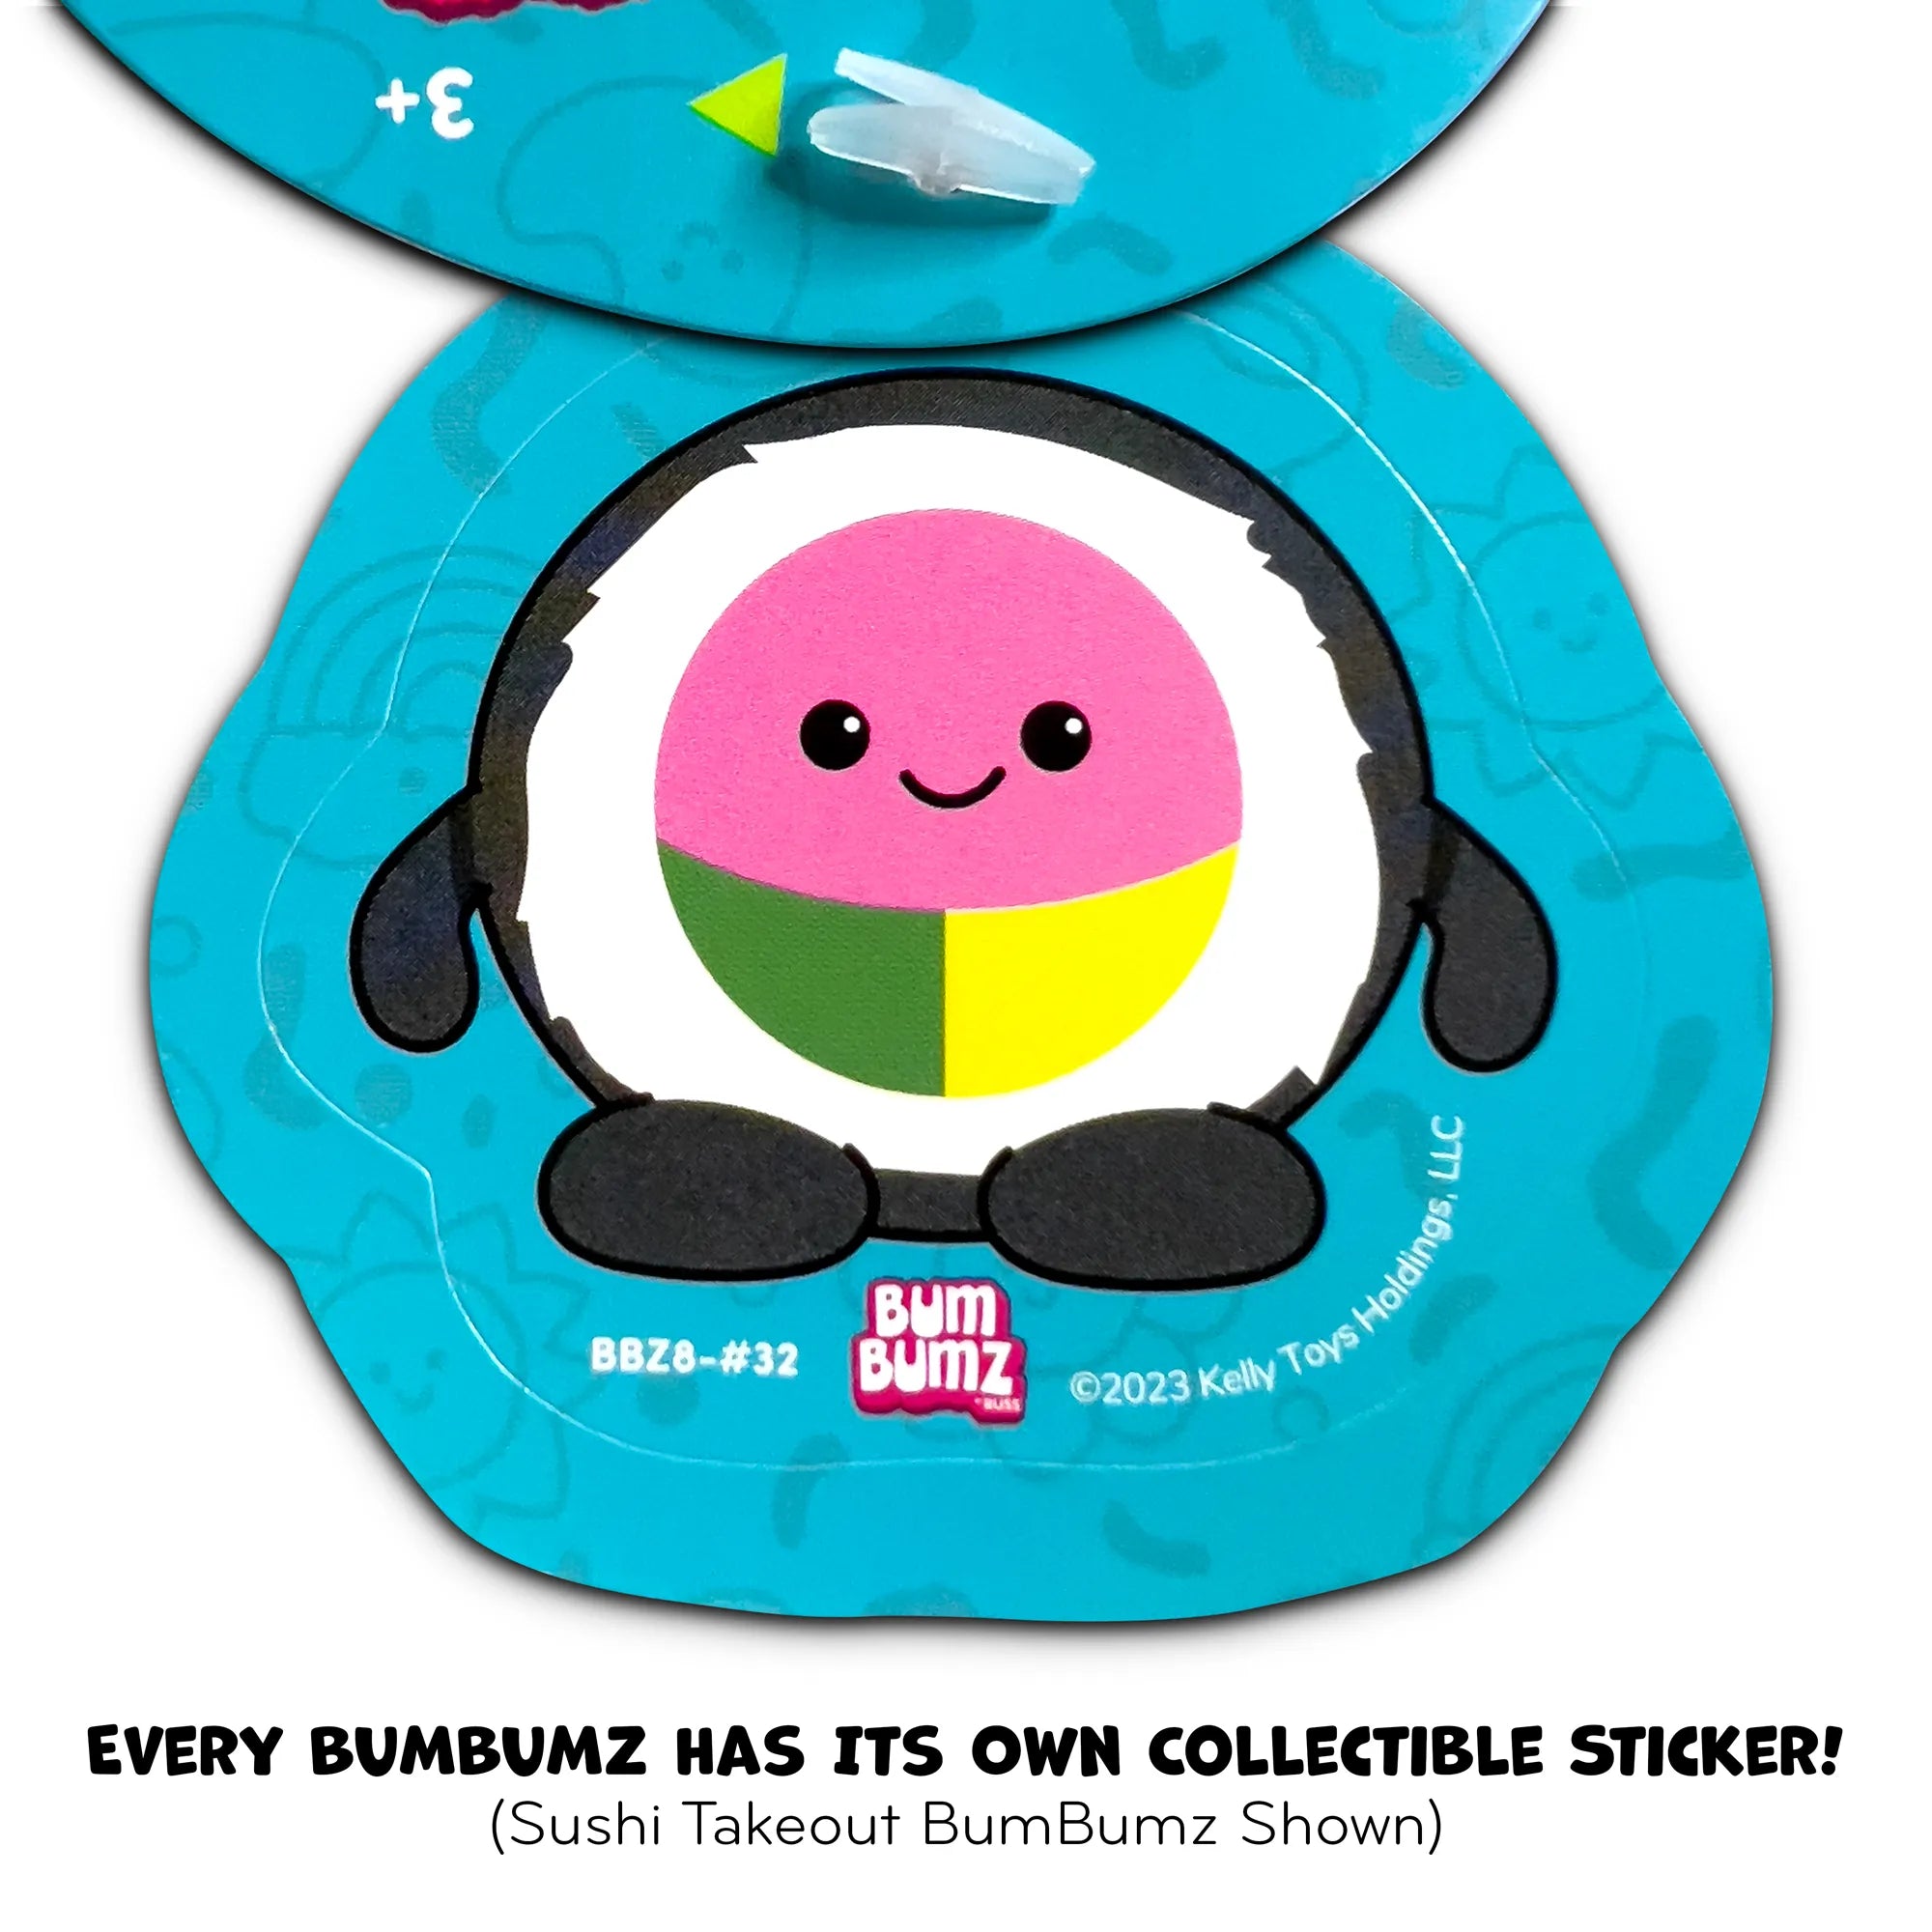 BumBumz Takeout Series - 7.5” Collectibles - Salmon Nigiri 'Seth' - Ages 3-Adult - Brown's Hobby & Game